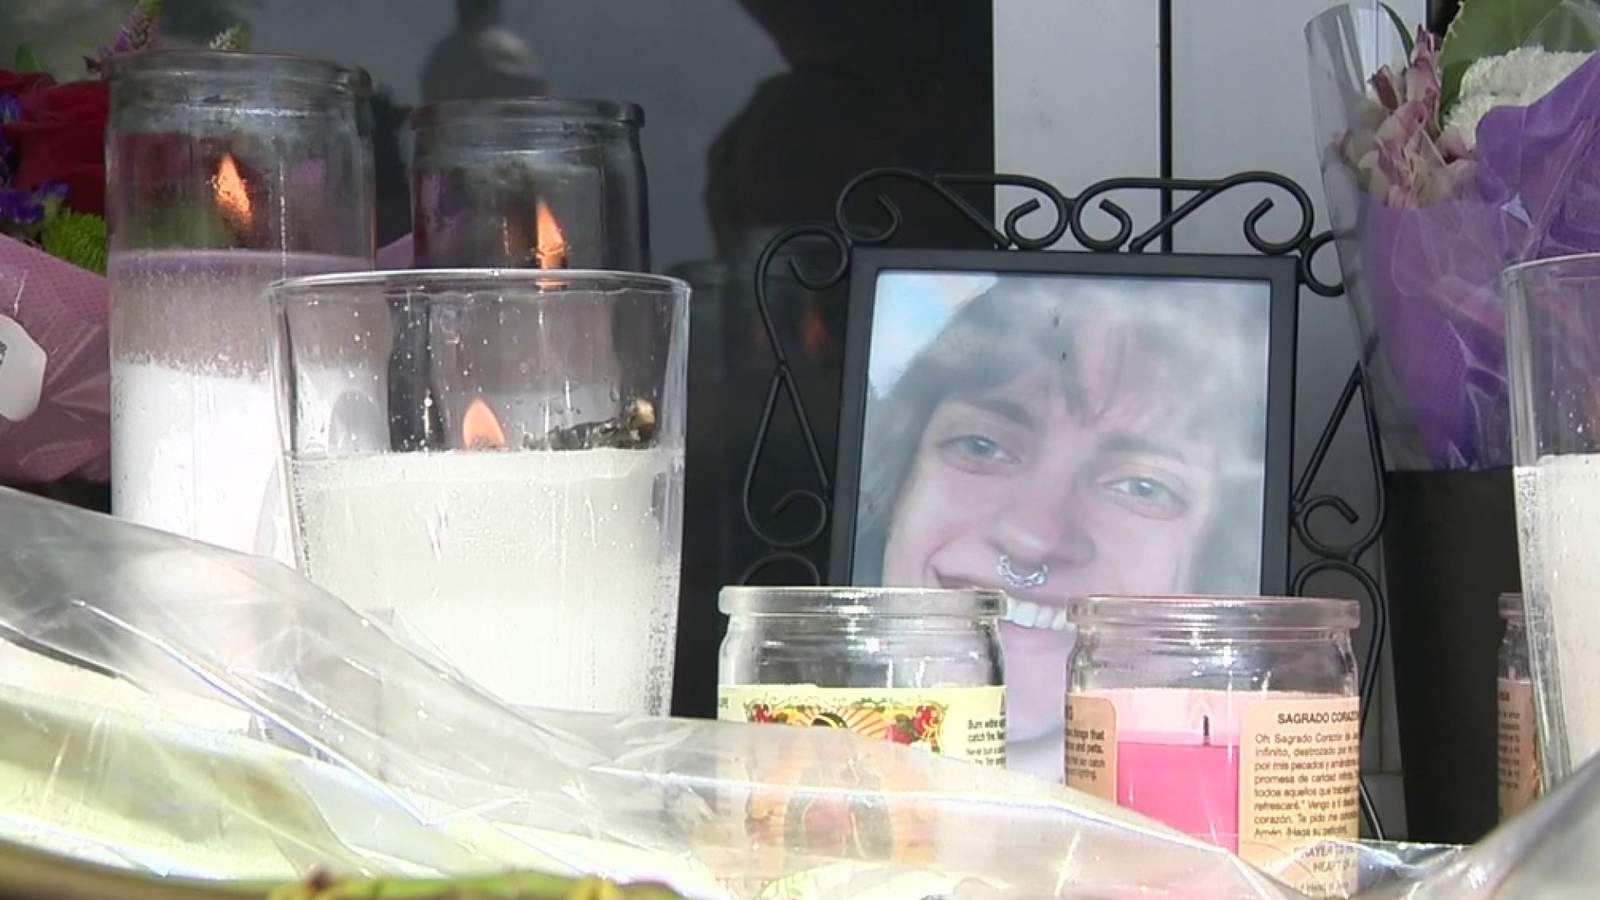 Memorial grows for employee killed in knife attack at barbershop